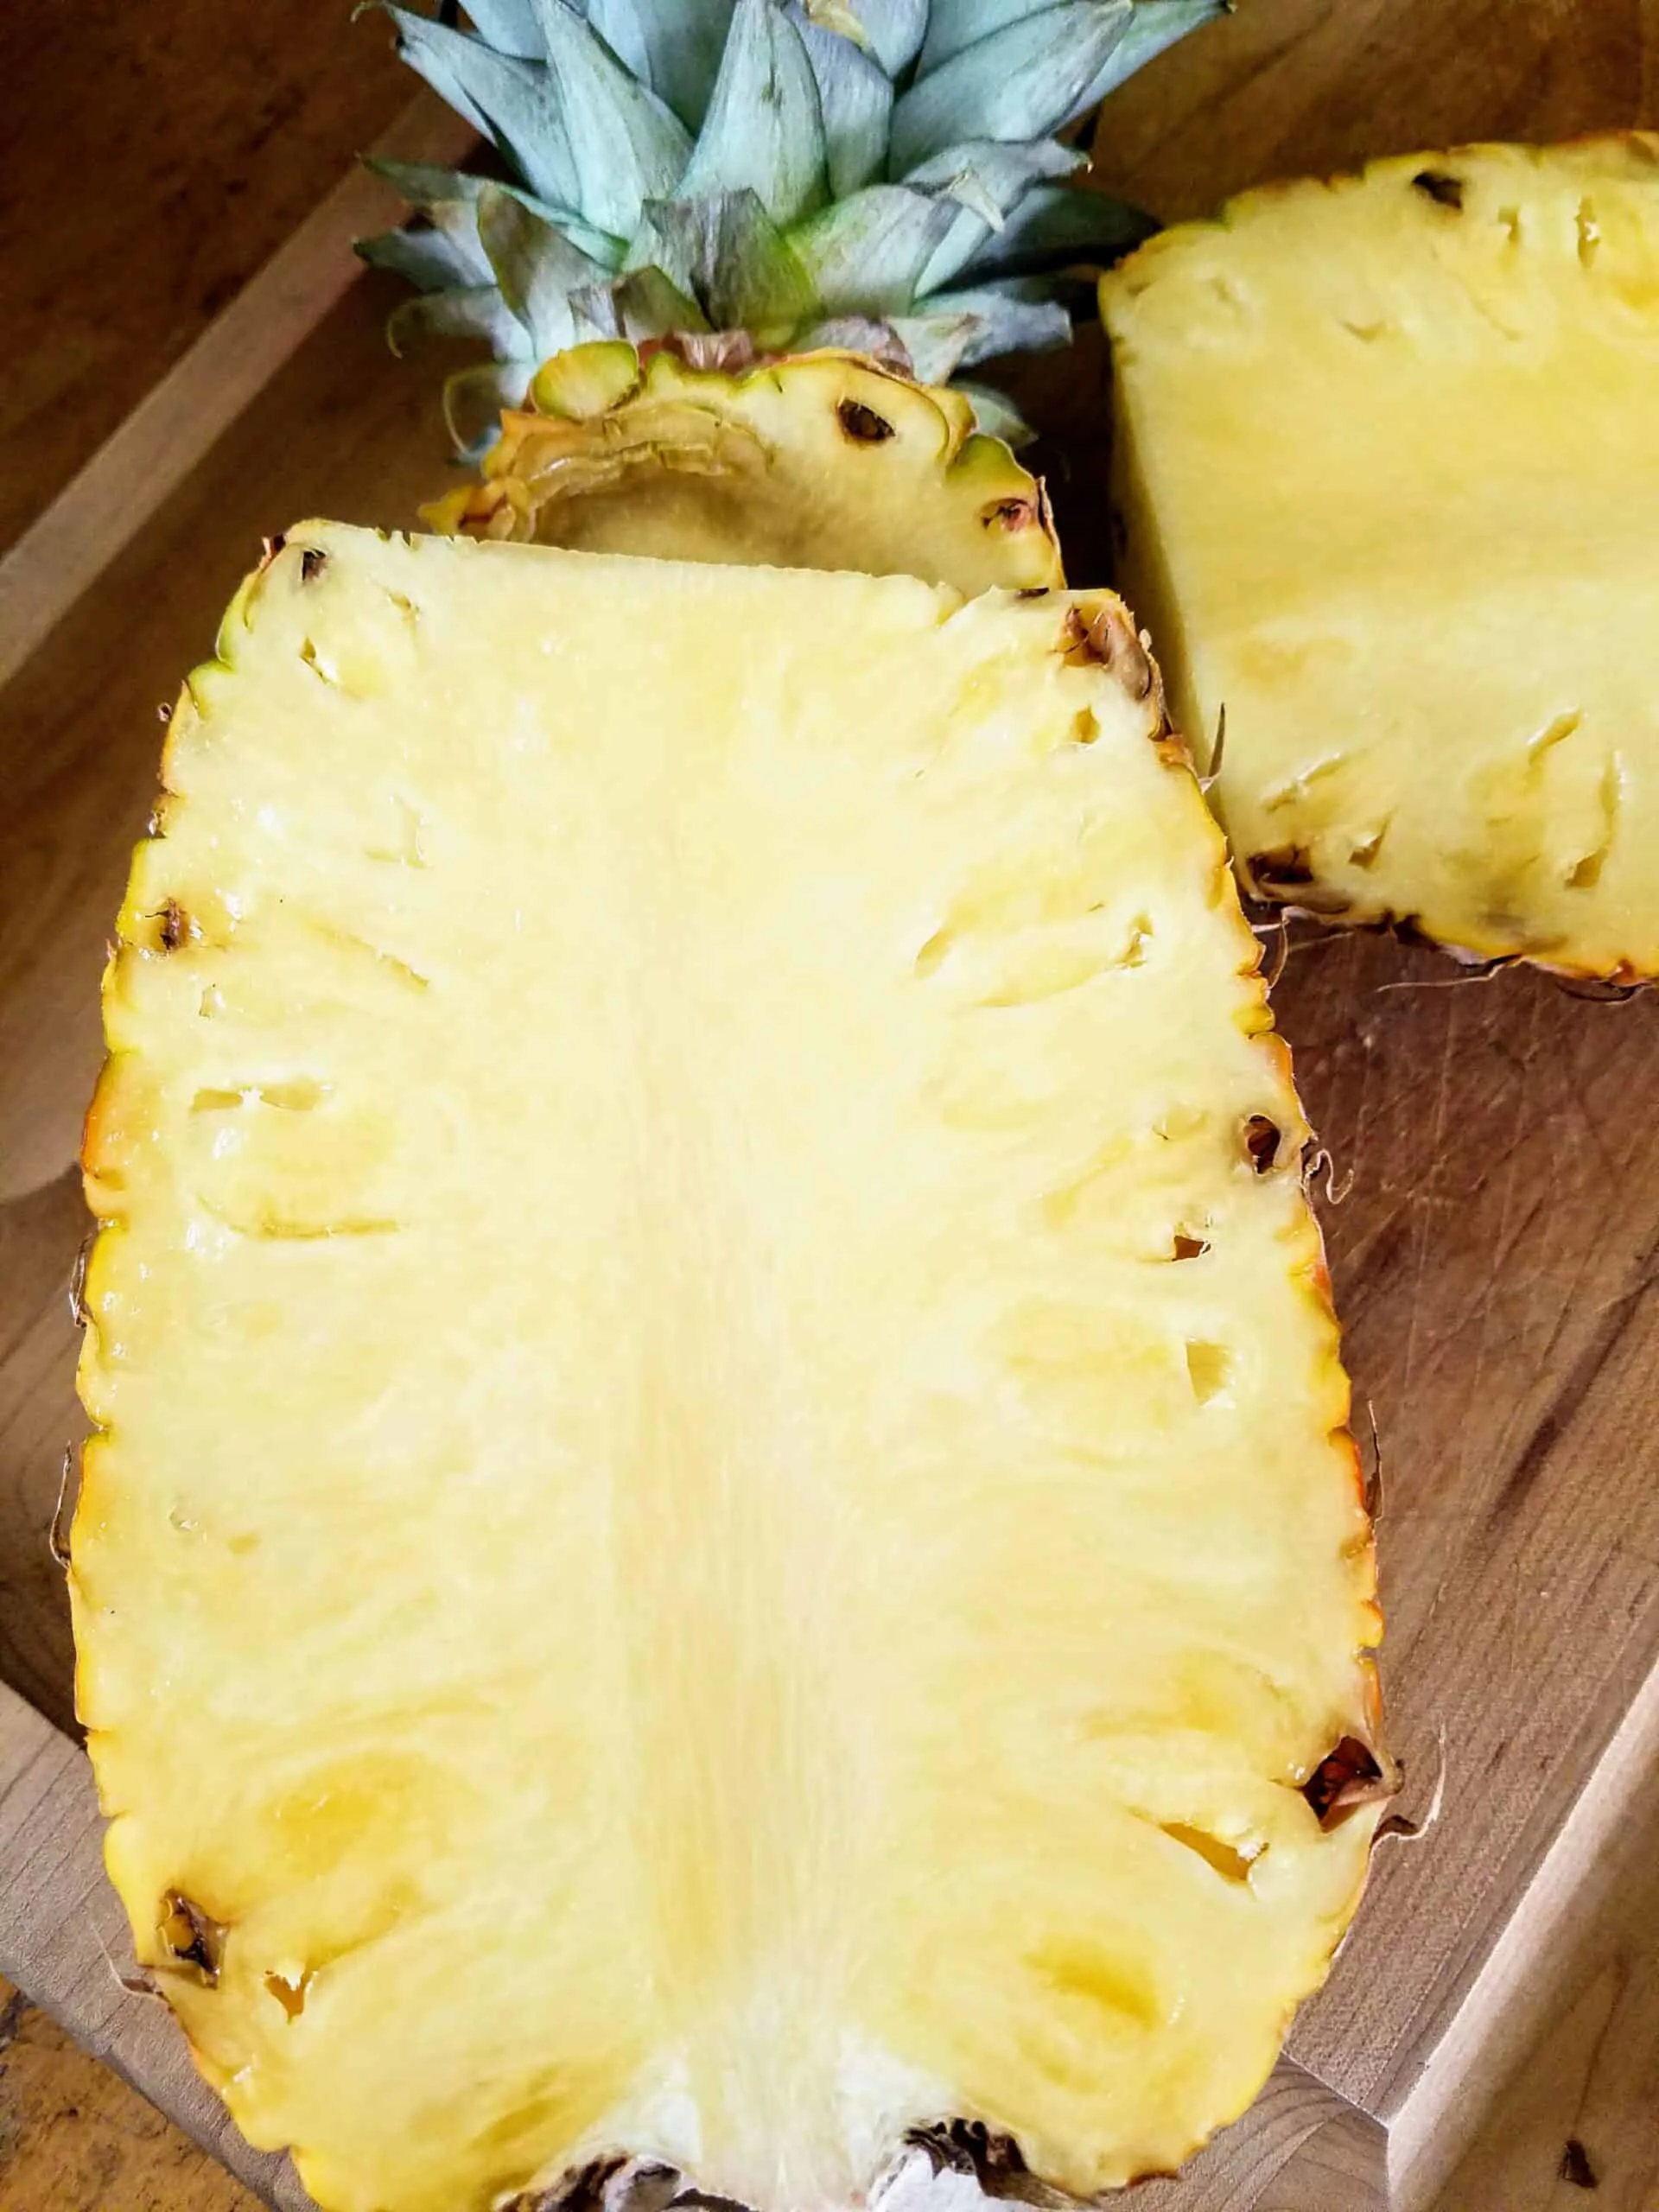 a half of a pineapple frshly cut on cutting board